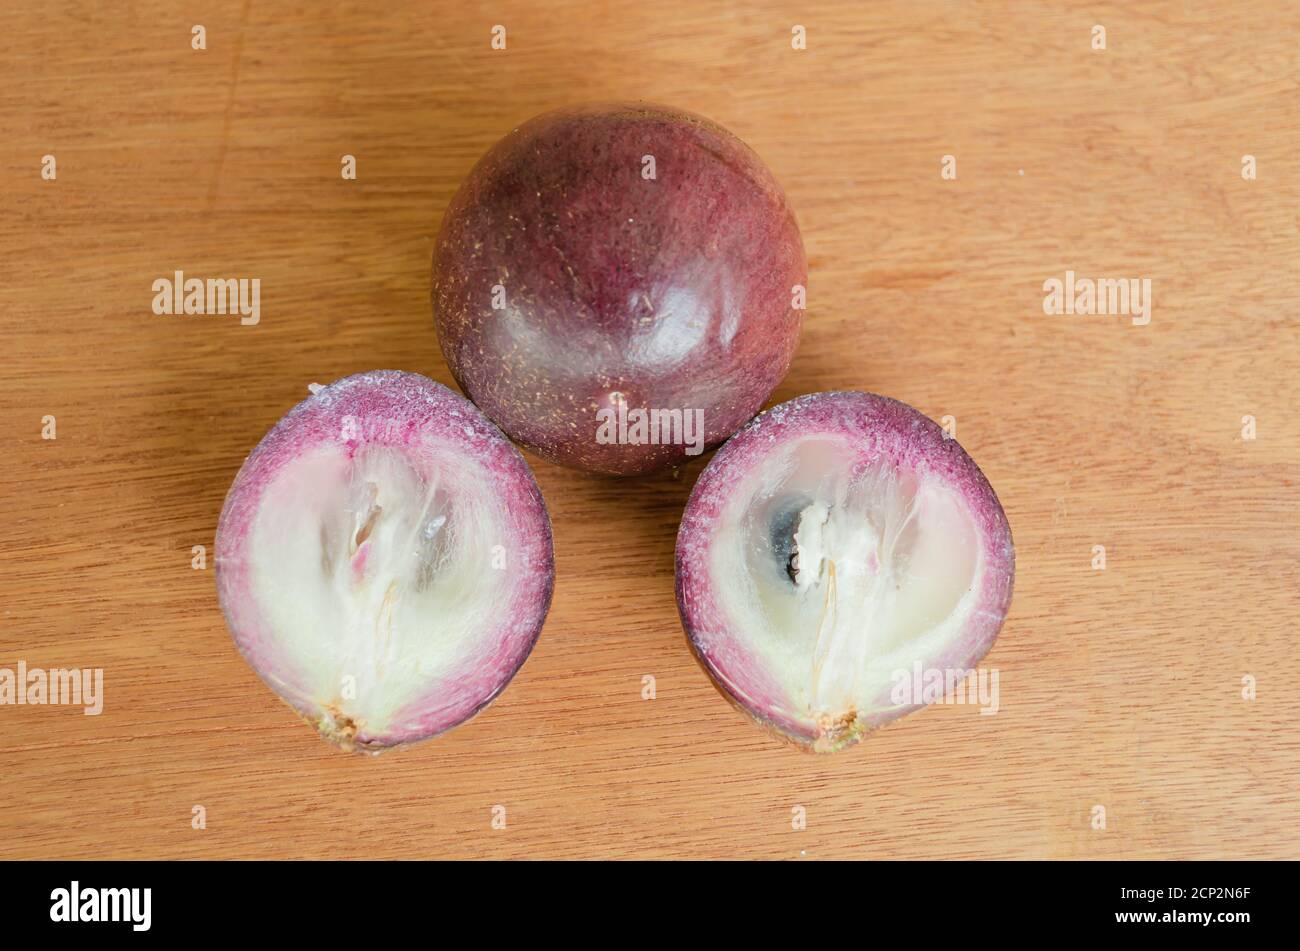 Ripe Whole Starapple And Cross Sections Stock Photo